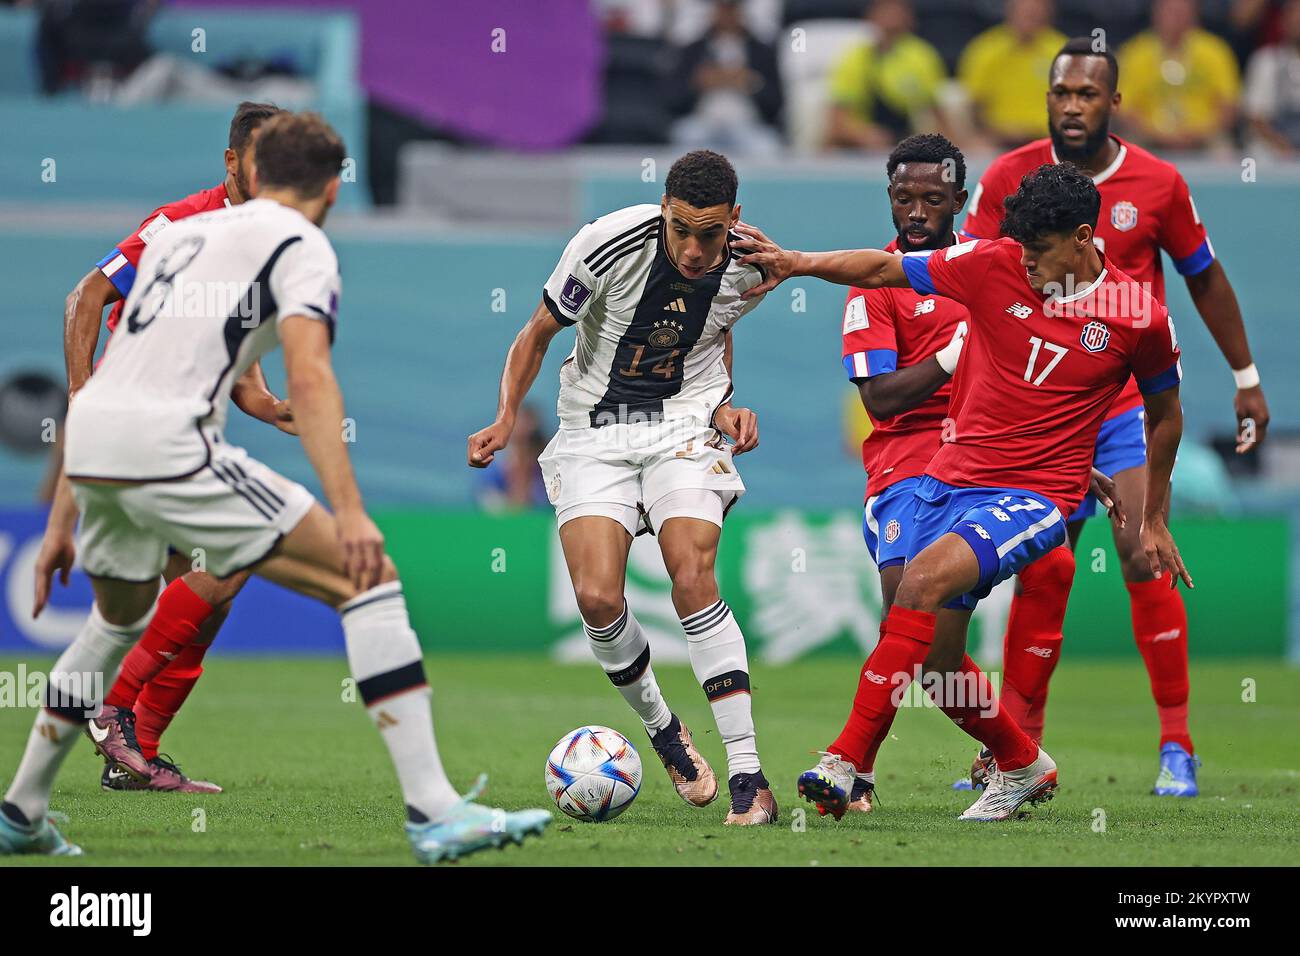 Yeltsin Tejeda of Costa Rica disputes the bid with Jamal Musiala of Germany, during the match between Costa Rica and Germany, for the 3rd round of Group E of the FIFA World Cup Qatar 2022, Al Bayt Stadium this Thursday 01. 30761 (Heuler Andrey / SPP) Stock Photo